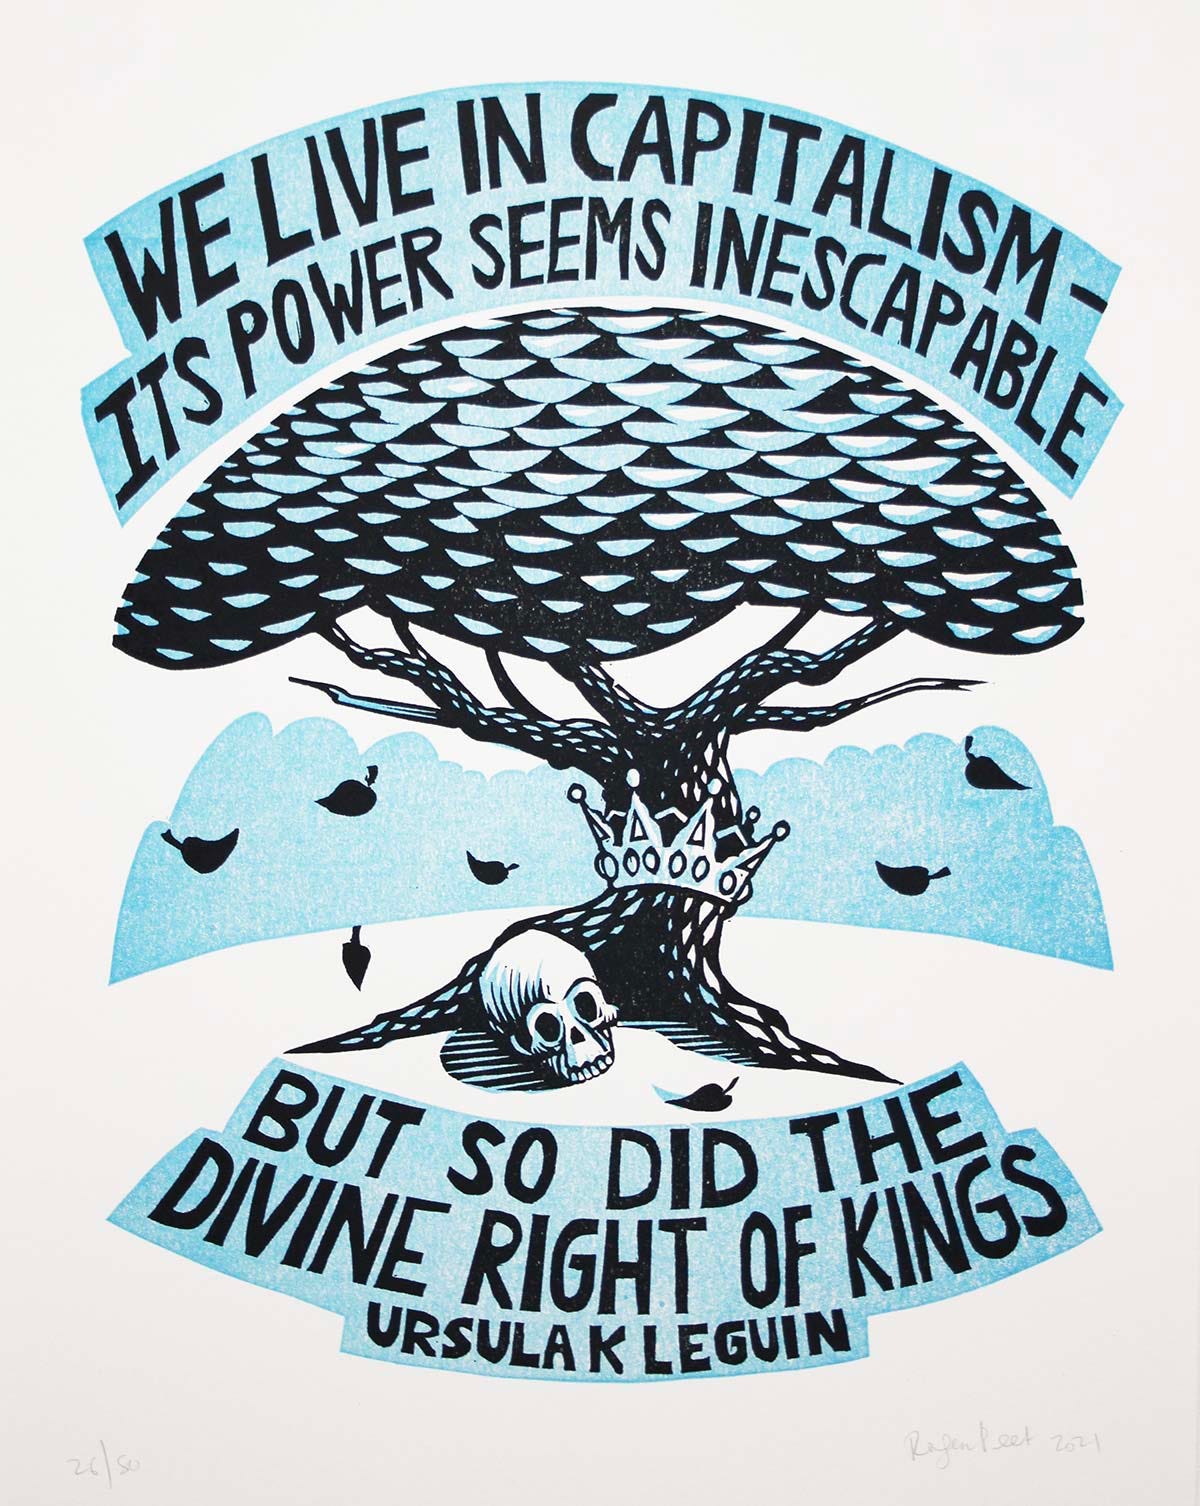 Illustration of Ursula K. Le Guin quote. There is a tree with a crown around its trunk, and a skull at its base.